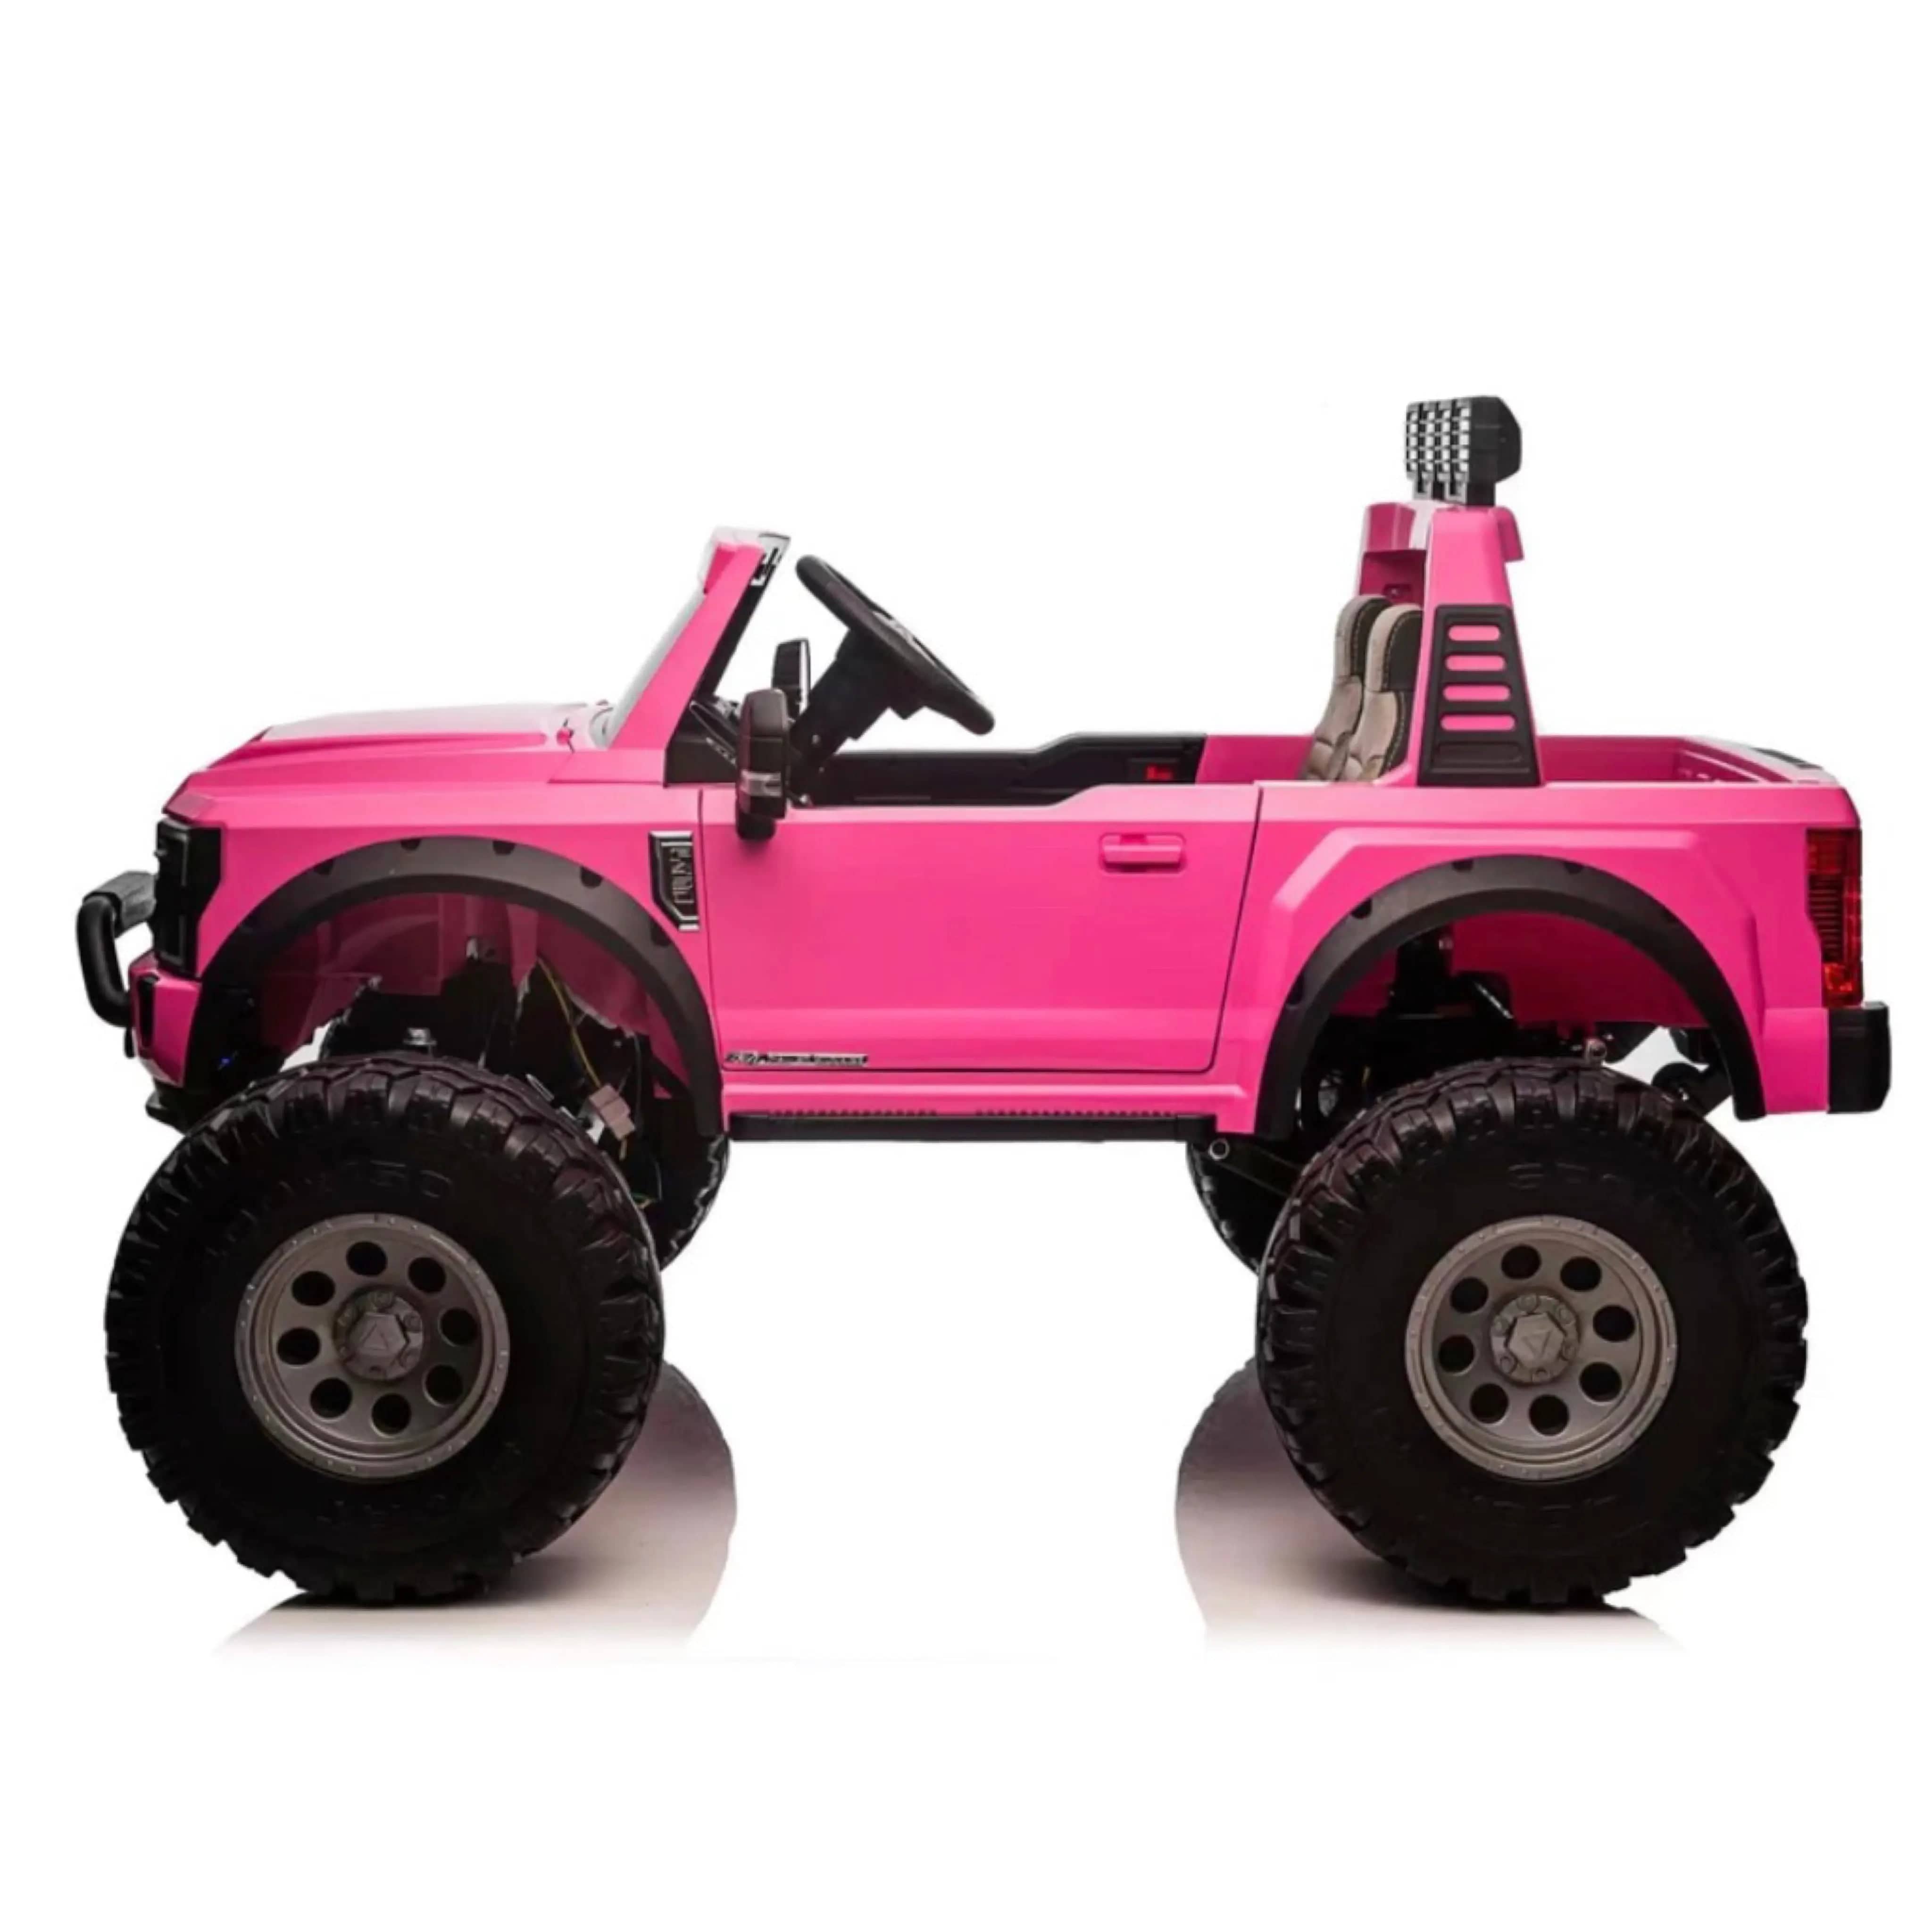 F450 Lifted 4x4 Electric Kid Jeep Car w/ 16" Rubber Tires Lifted R&G TOYS